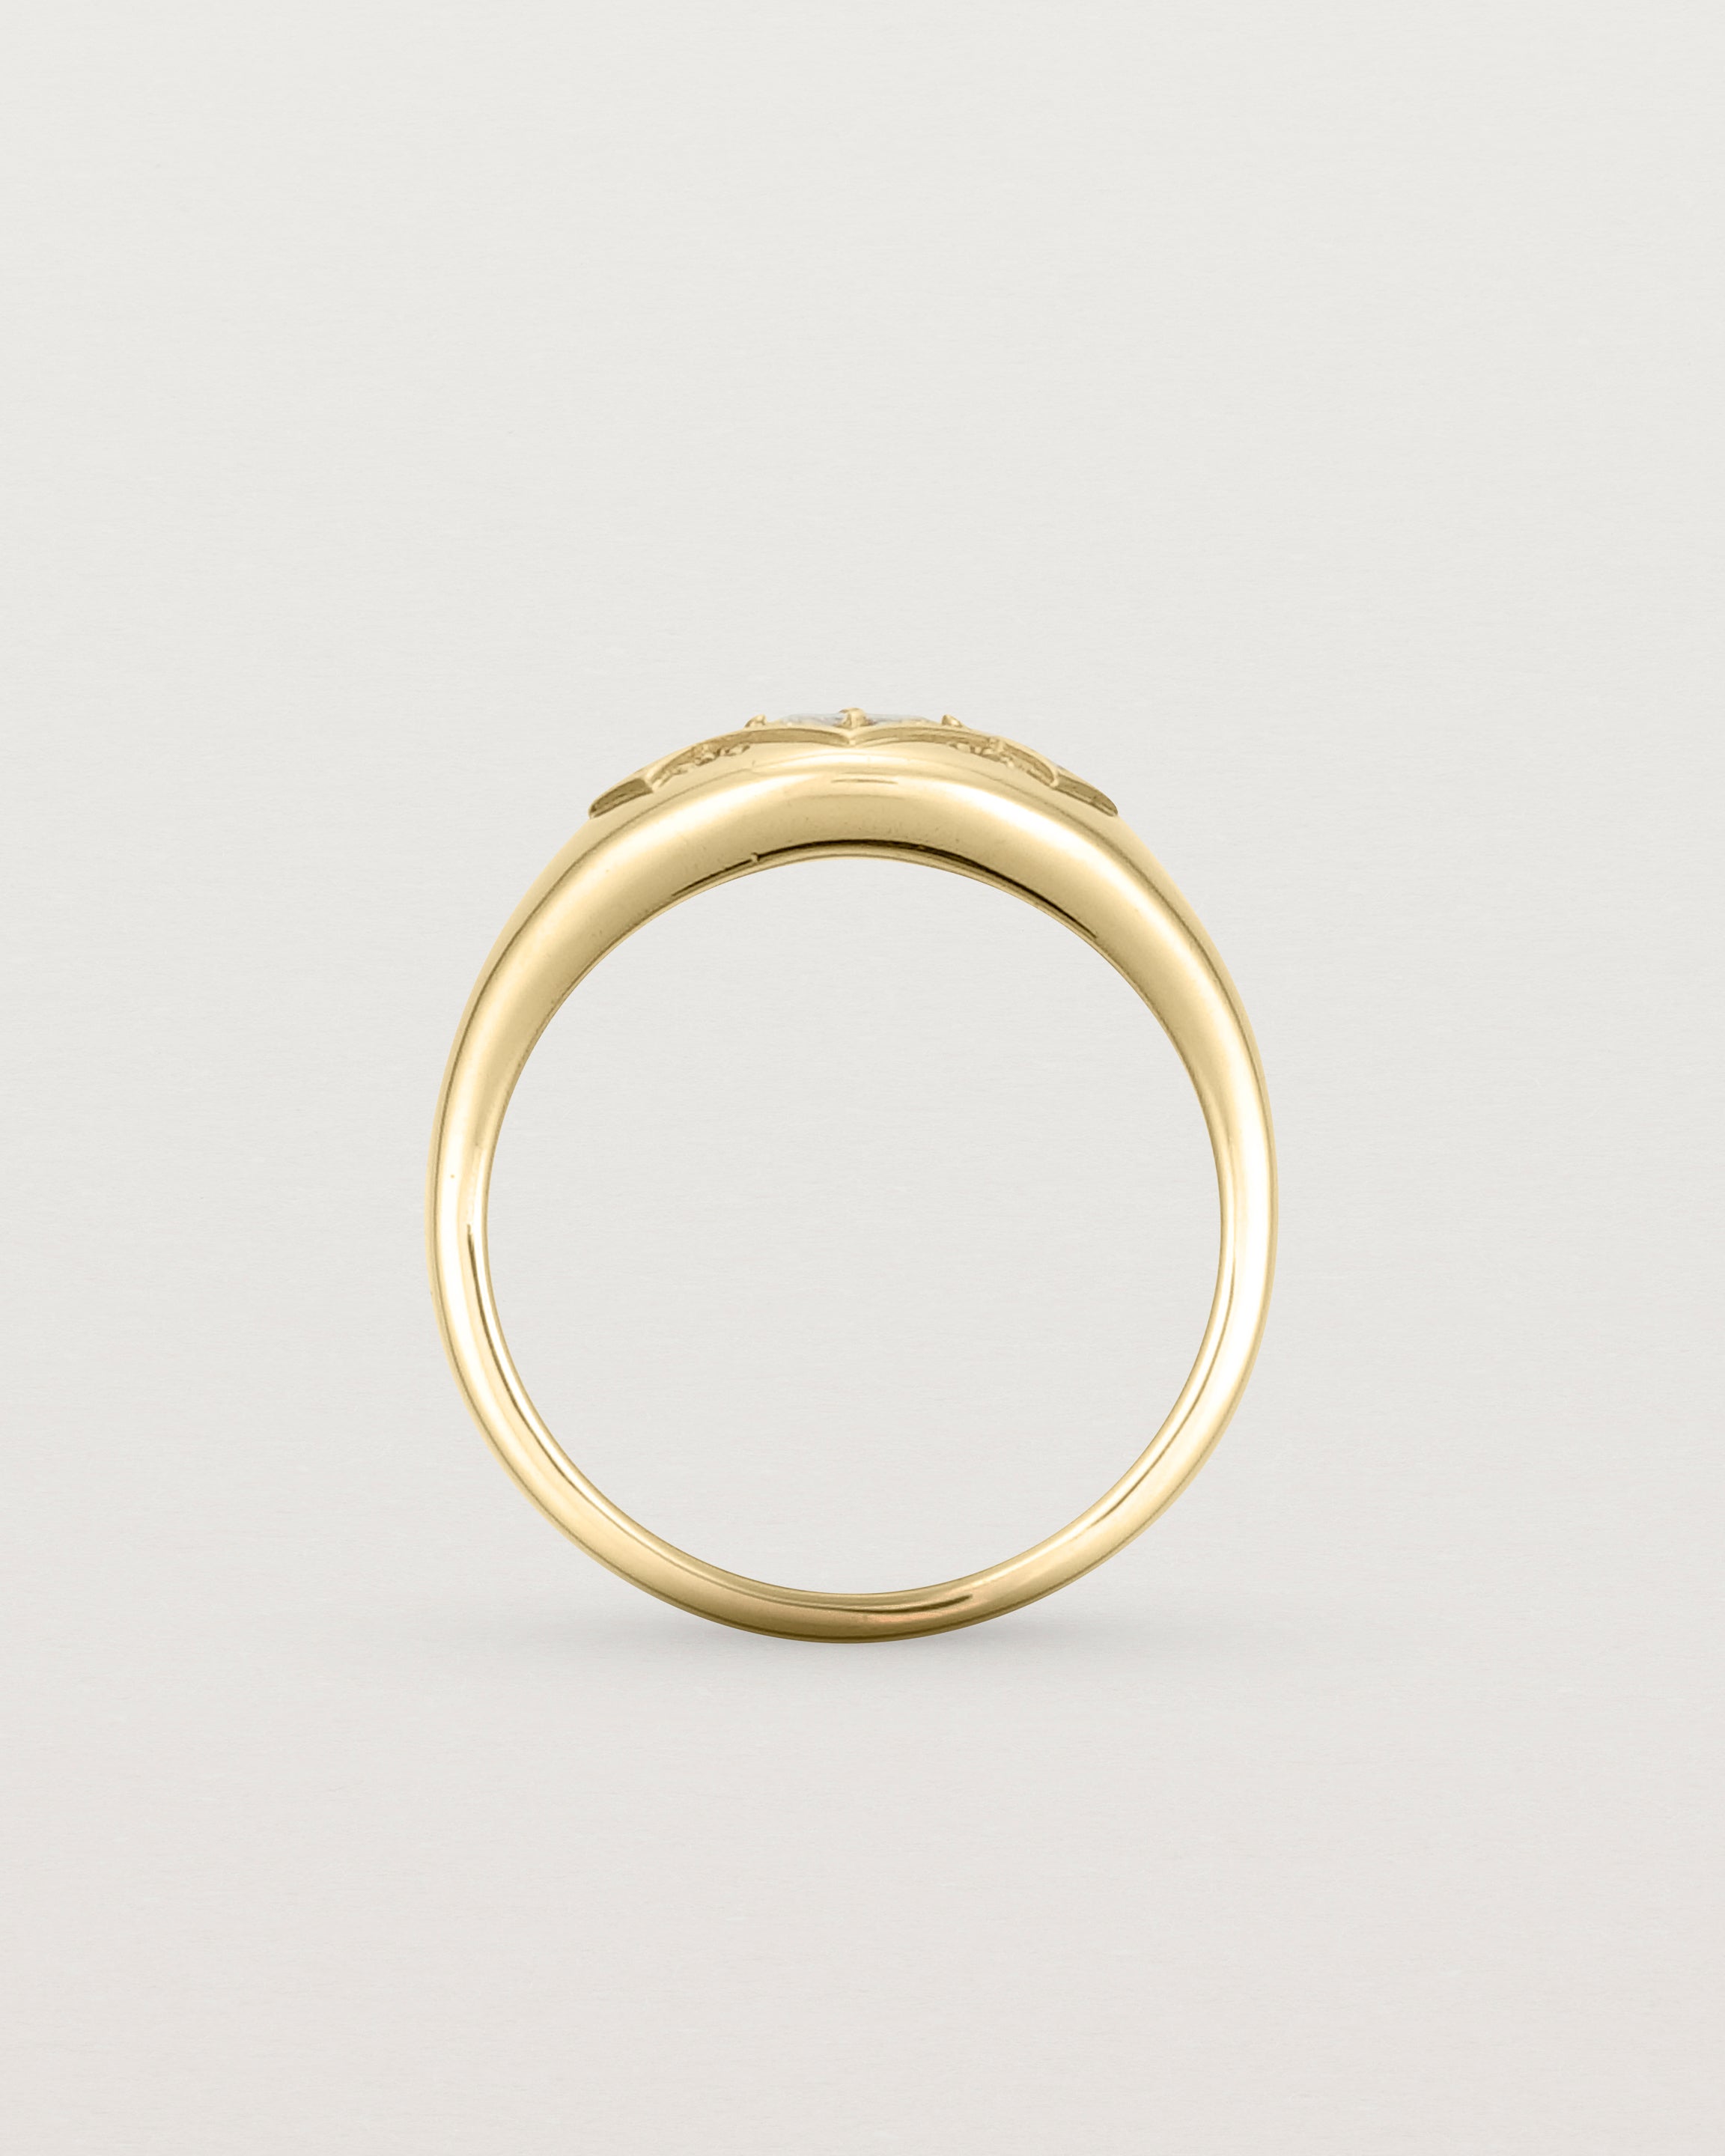 Standing view of the Seule Cheri Ring | Diamonds | Yellow Gold.